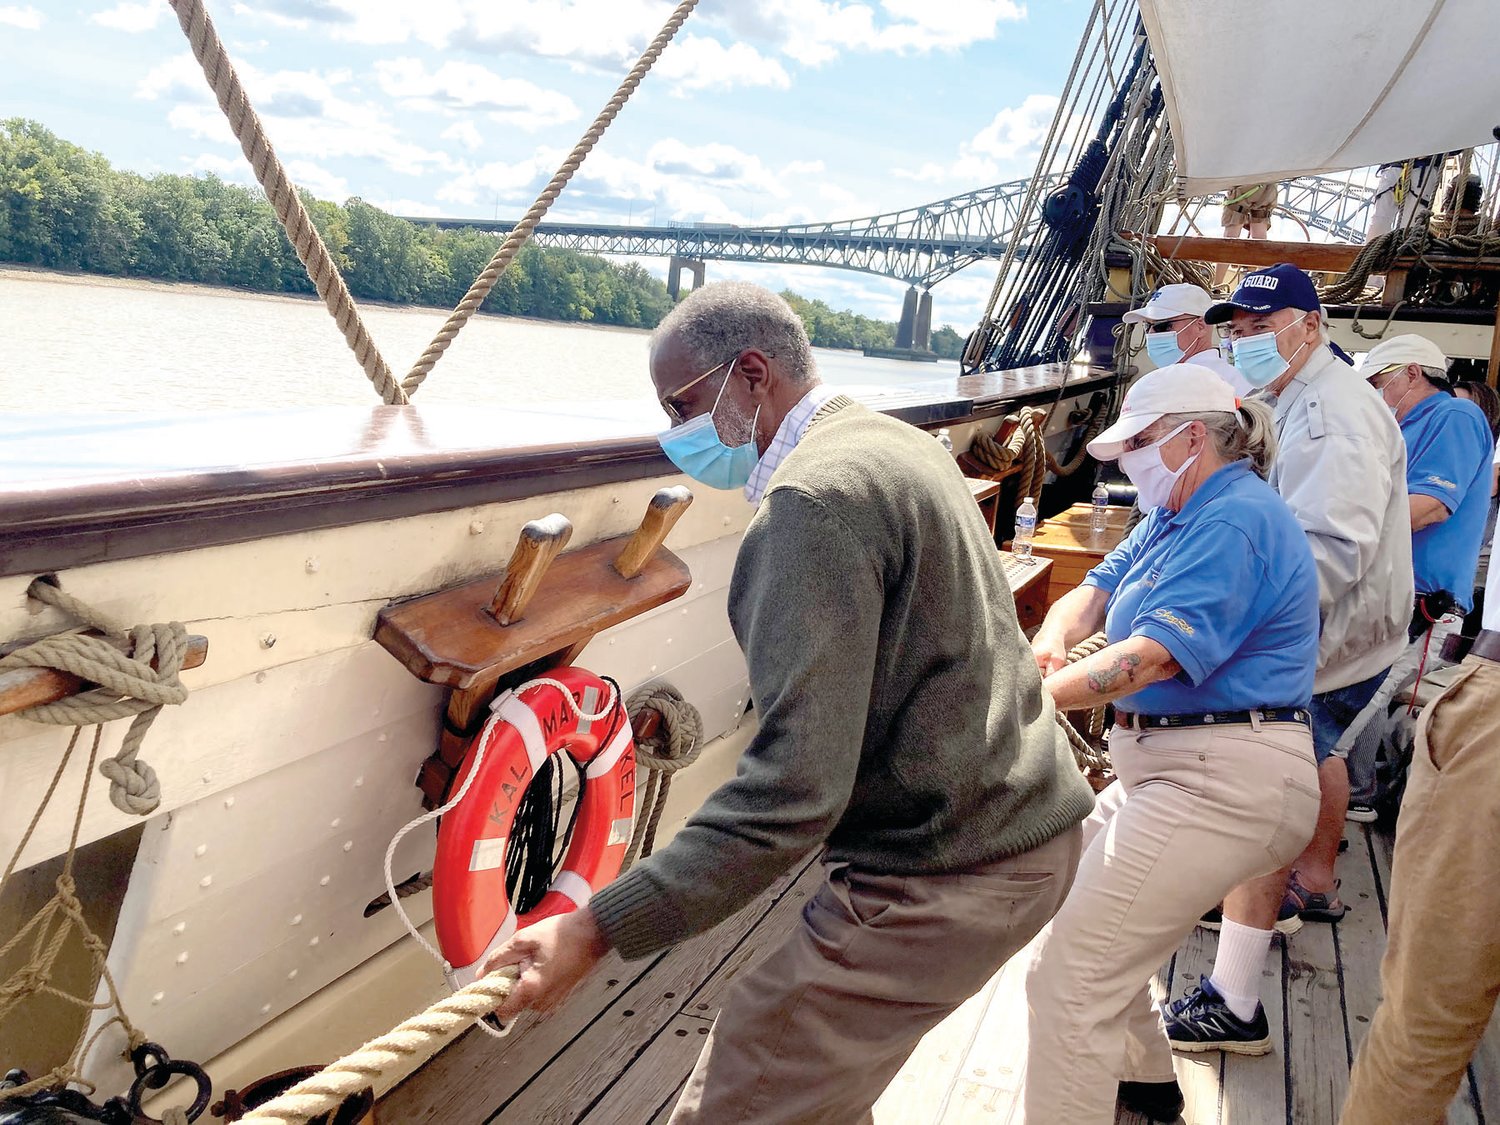 State Sen. Art Haywood, left, helps raise the sails on the tall ship.